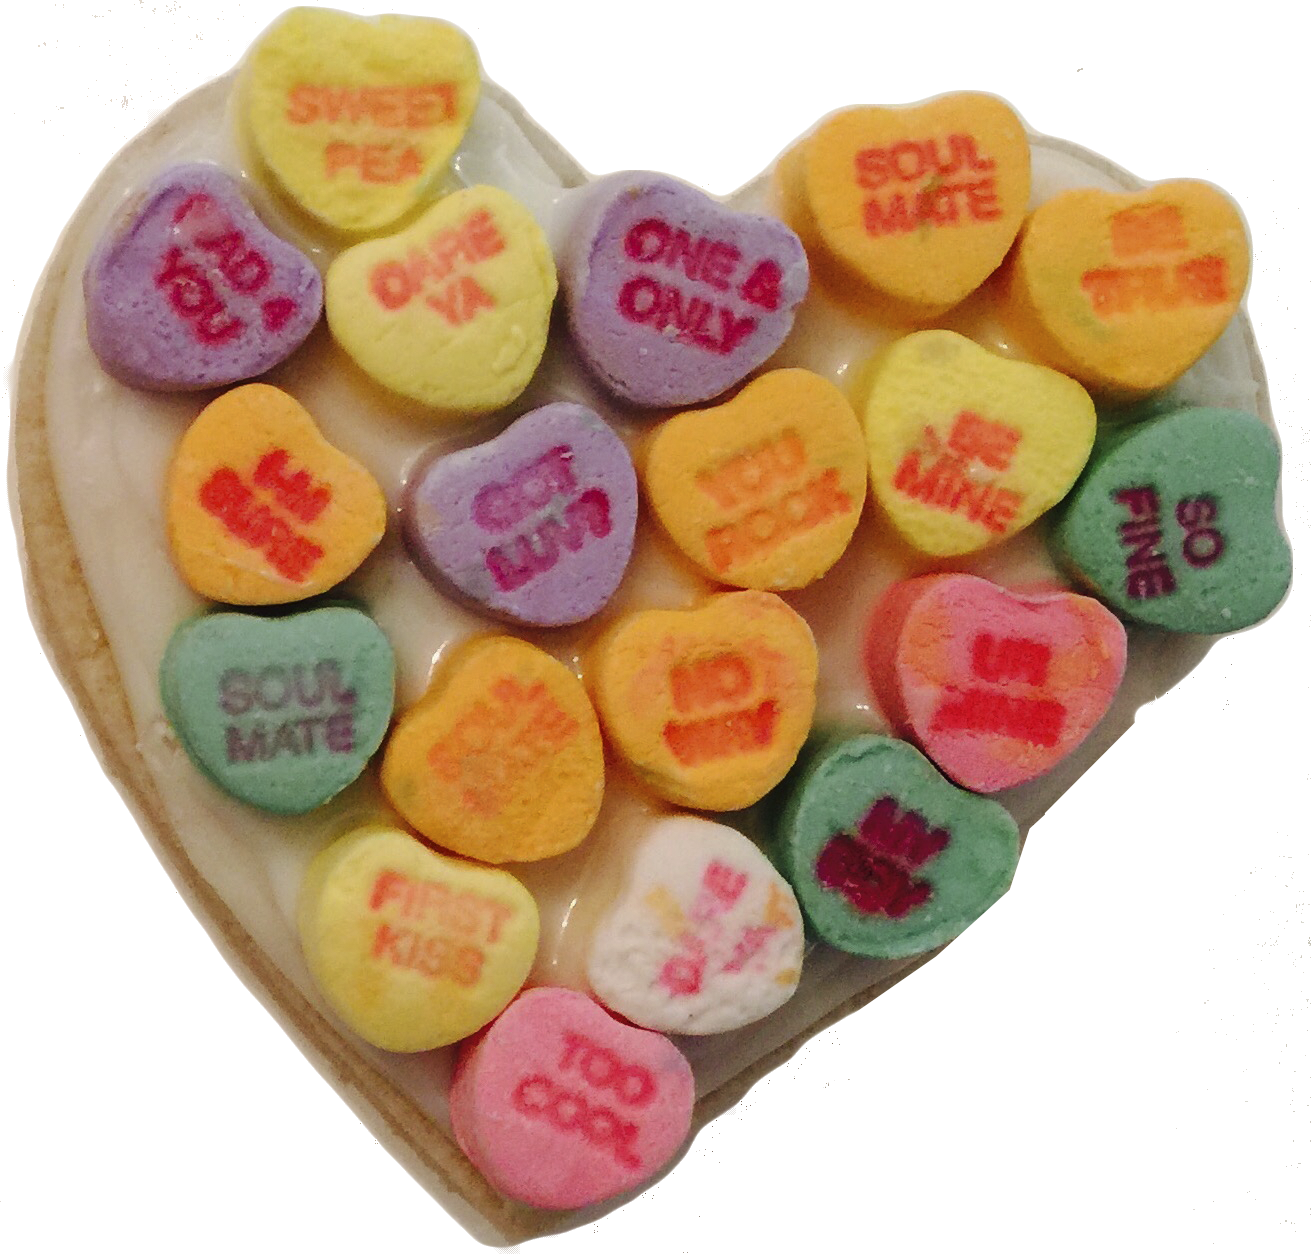 UPDATE] The Company That Makes Those Iconic Candy Hearts Shut Down